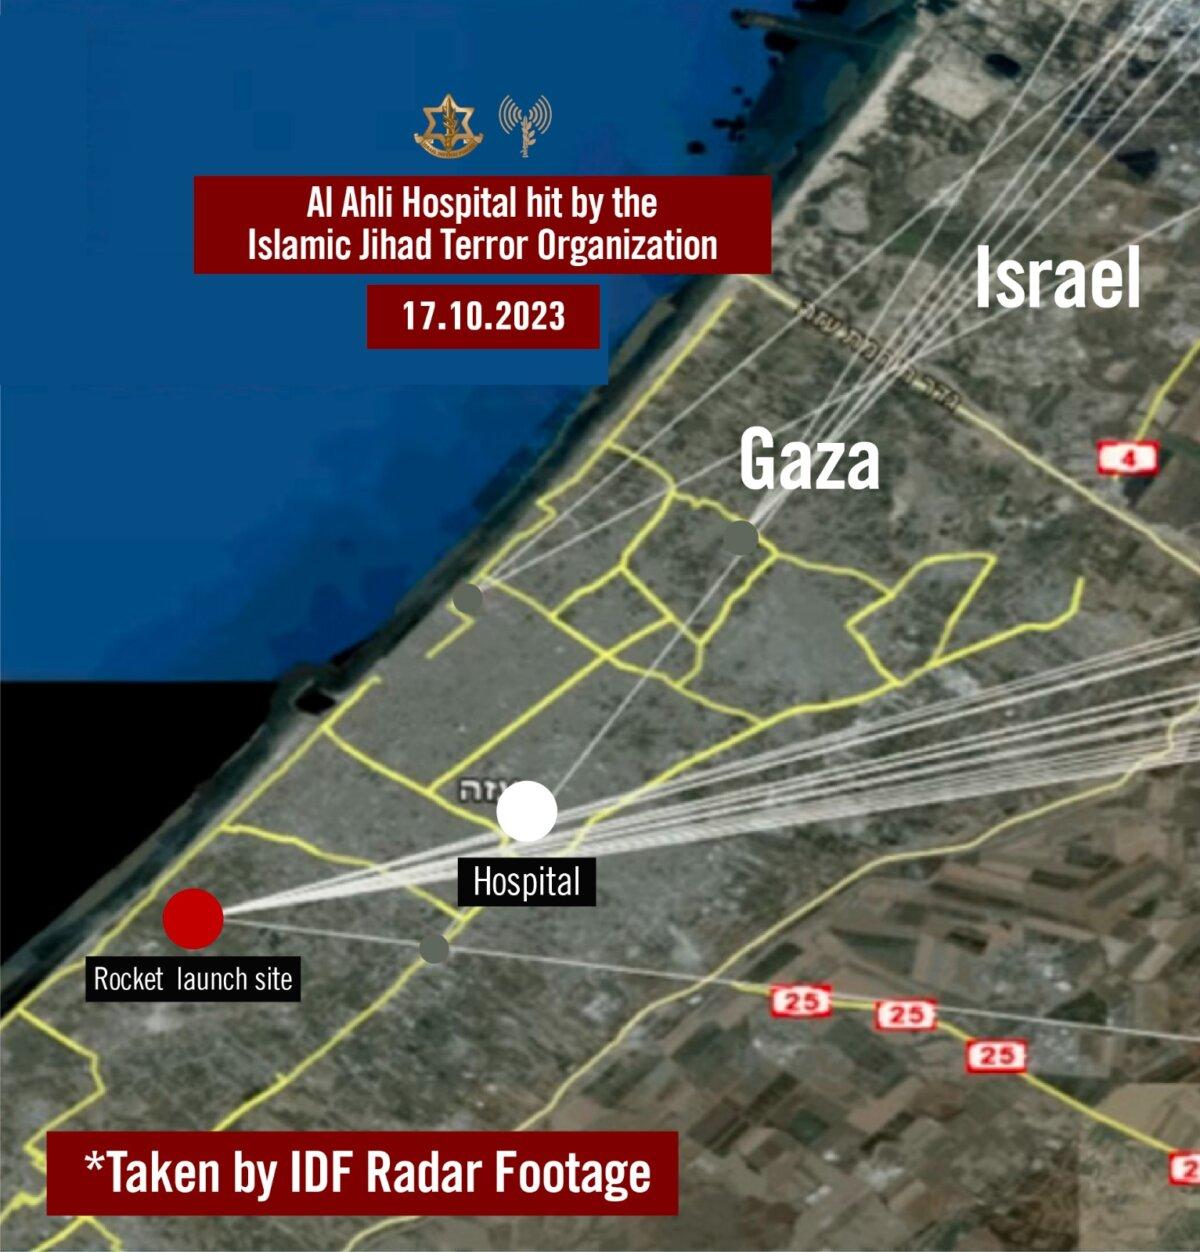 A map supplied by the Israel Defense Forces (IDF) on Oct. 17, 2023, showing the path of rockets fired by the Islamic Jihad Terror Organization toward Israel that they claim struck the Al Ahli Hospital. (Courtesy of IDF)